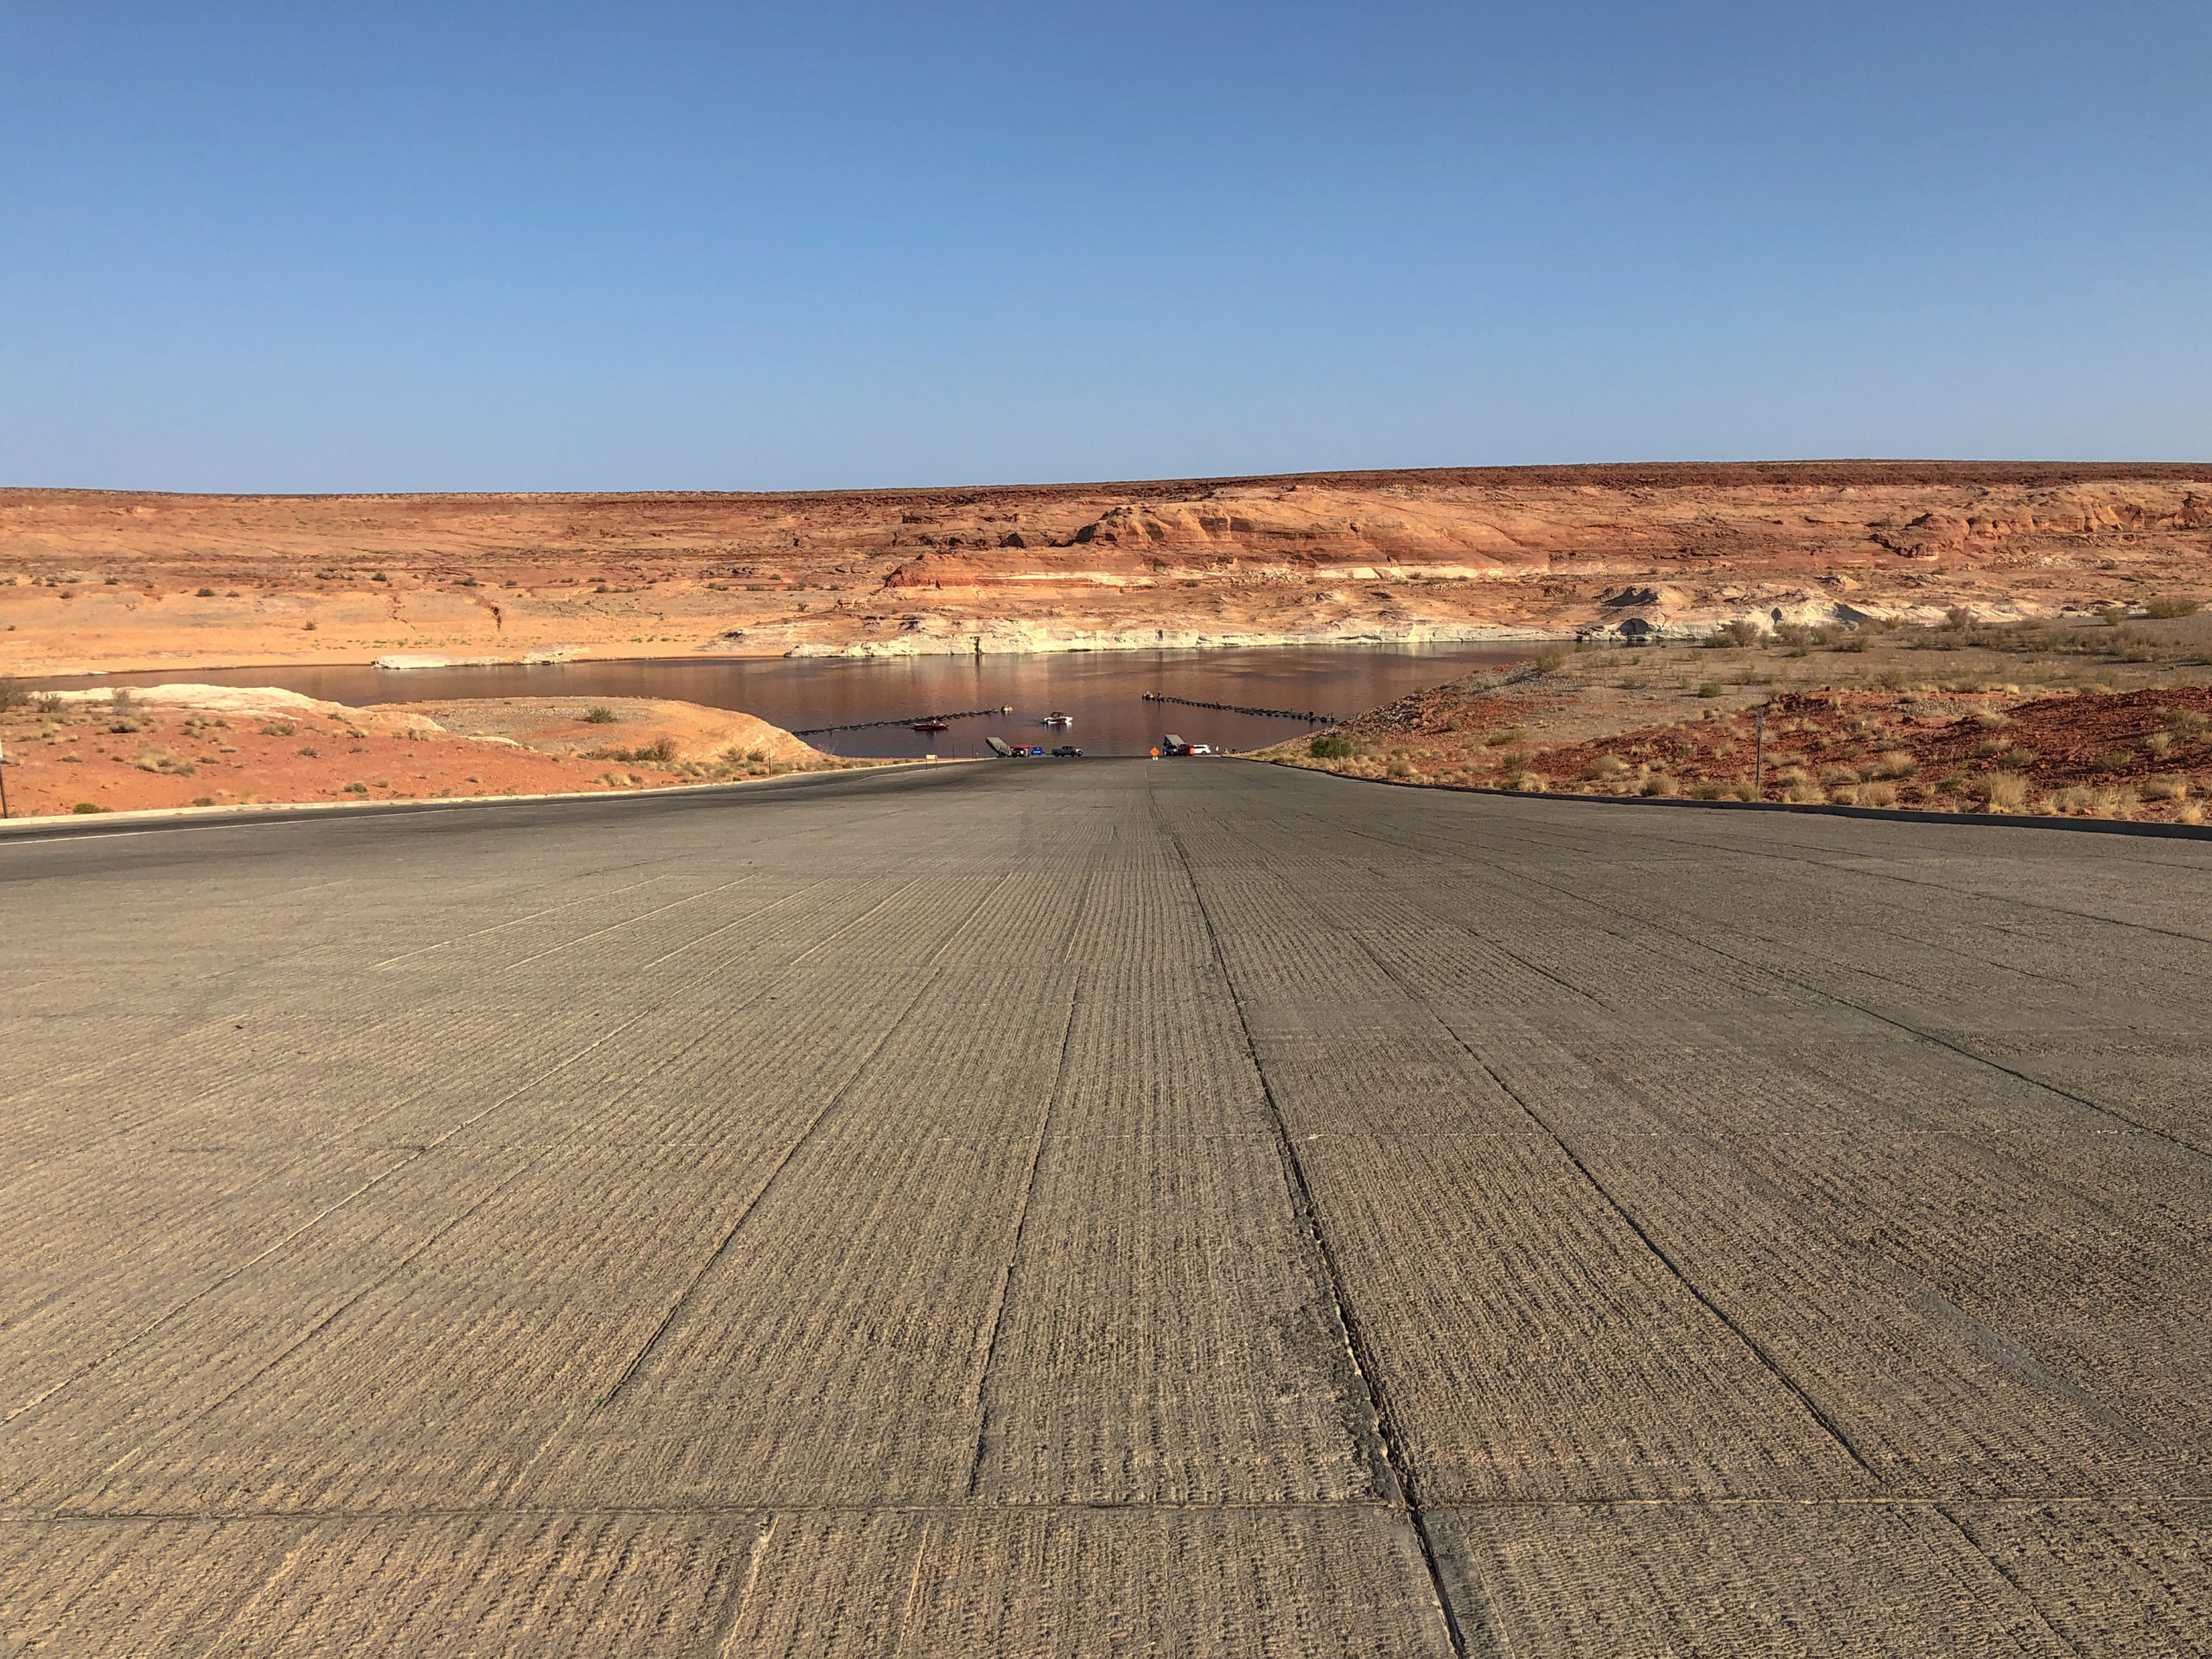 The large boat ramp at Antelope Point near Page, Arizona, provides another glimpse of what Lake Powell looks like when the water level is down 104 feet. As water levels drop, some boat ramps around the lake can no longer be used. Photo credit: Denver Water.